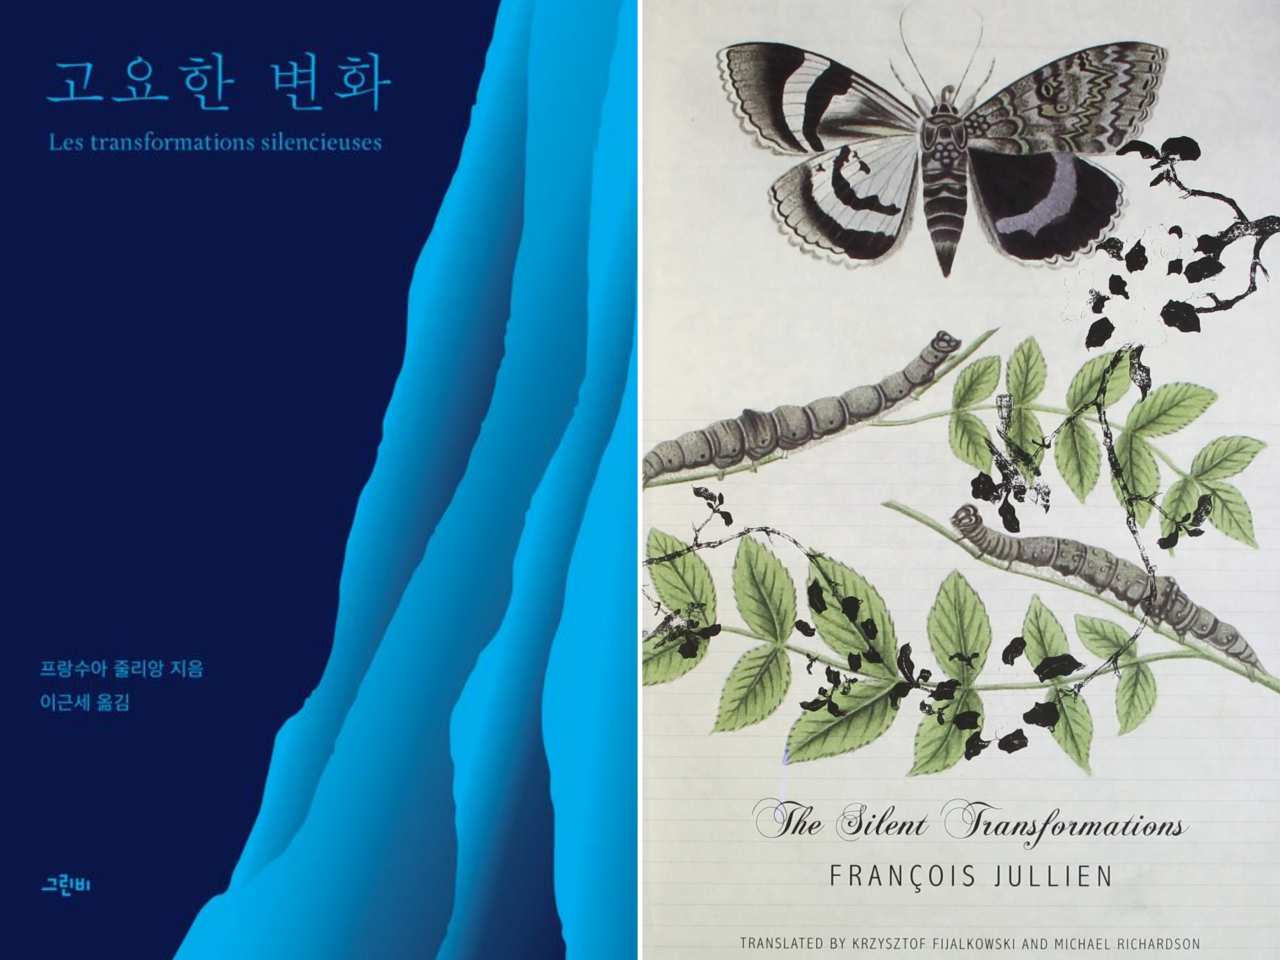 The Korean edition (left) and English edition of 